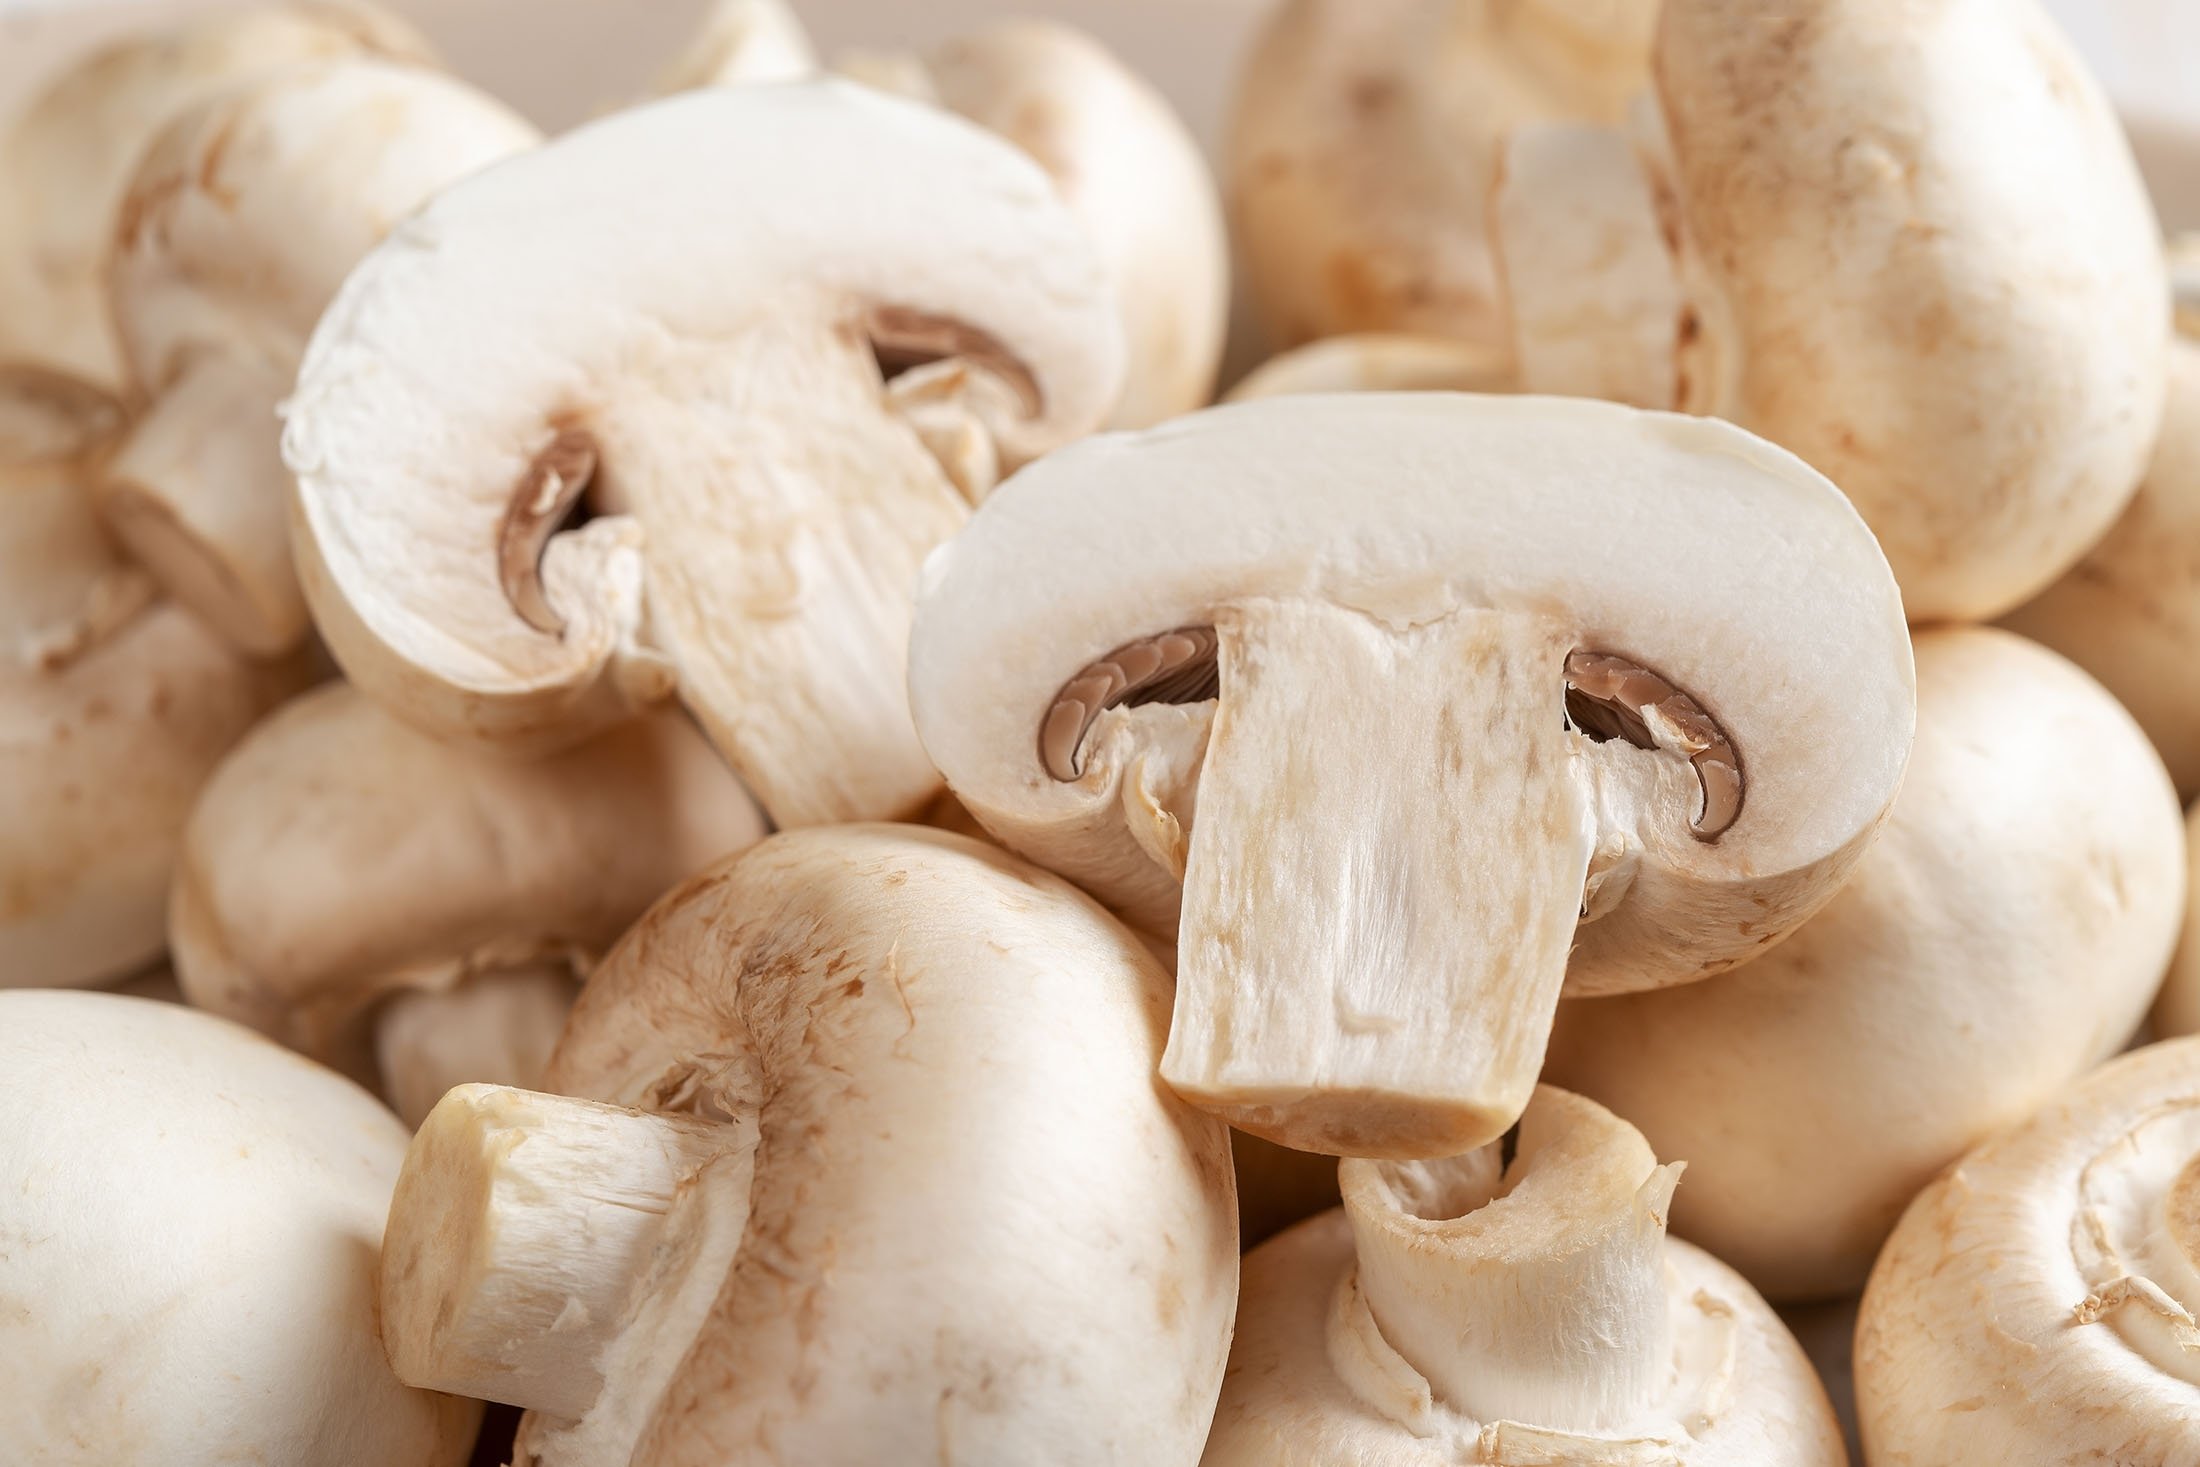 The cultivated mushroom is the most farmed and consumed mushroom species in the world. (Shutterstock Photo)